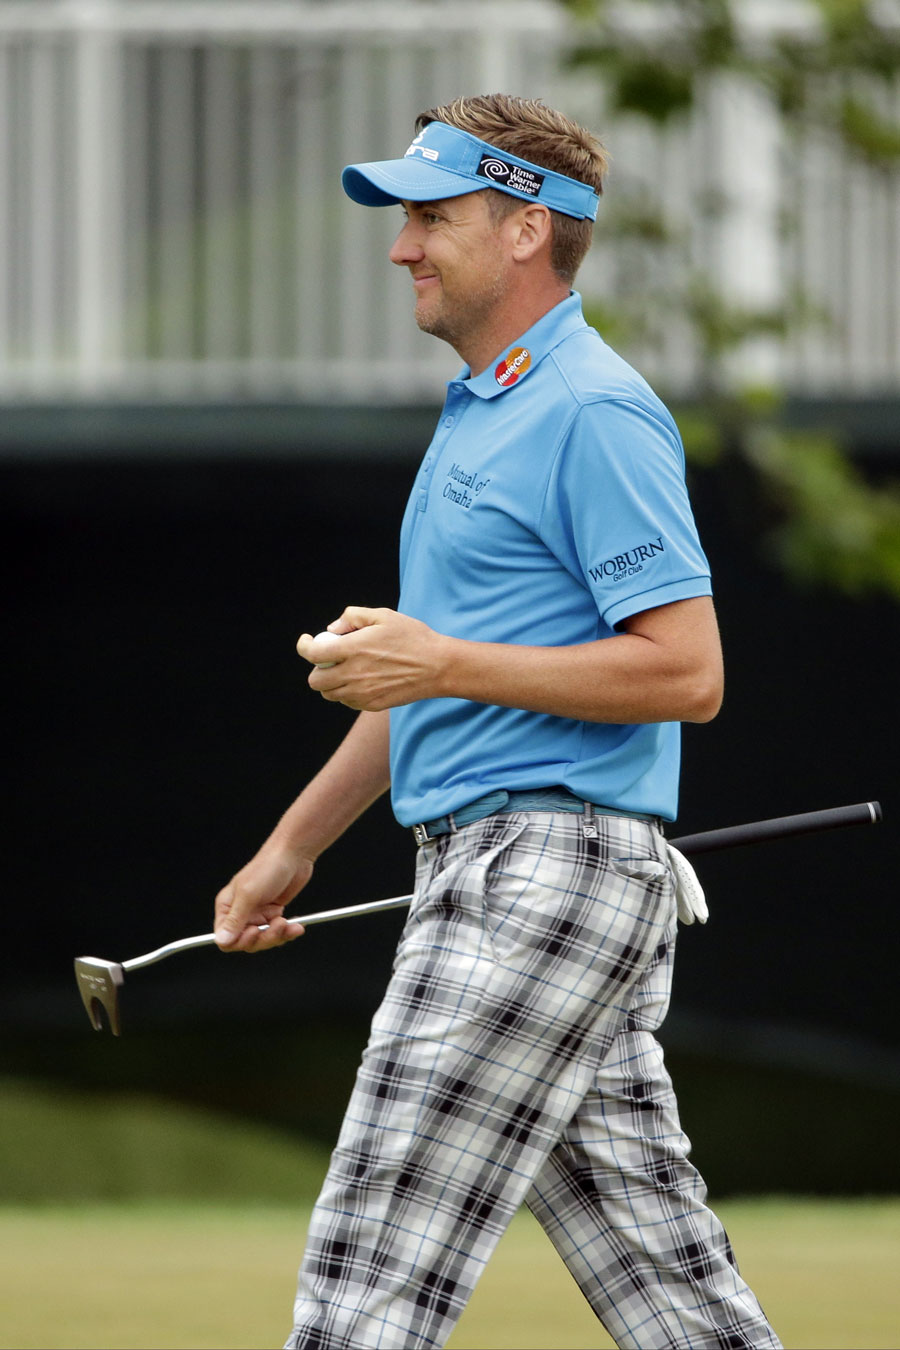 Ian Poulter walks with a grin on his face